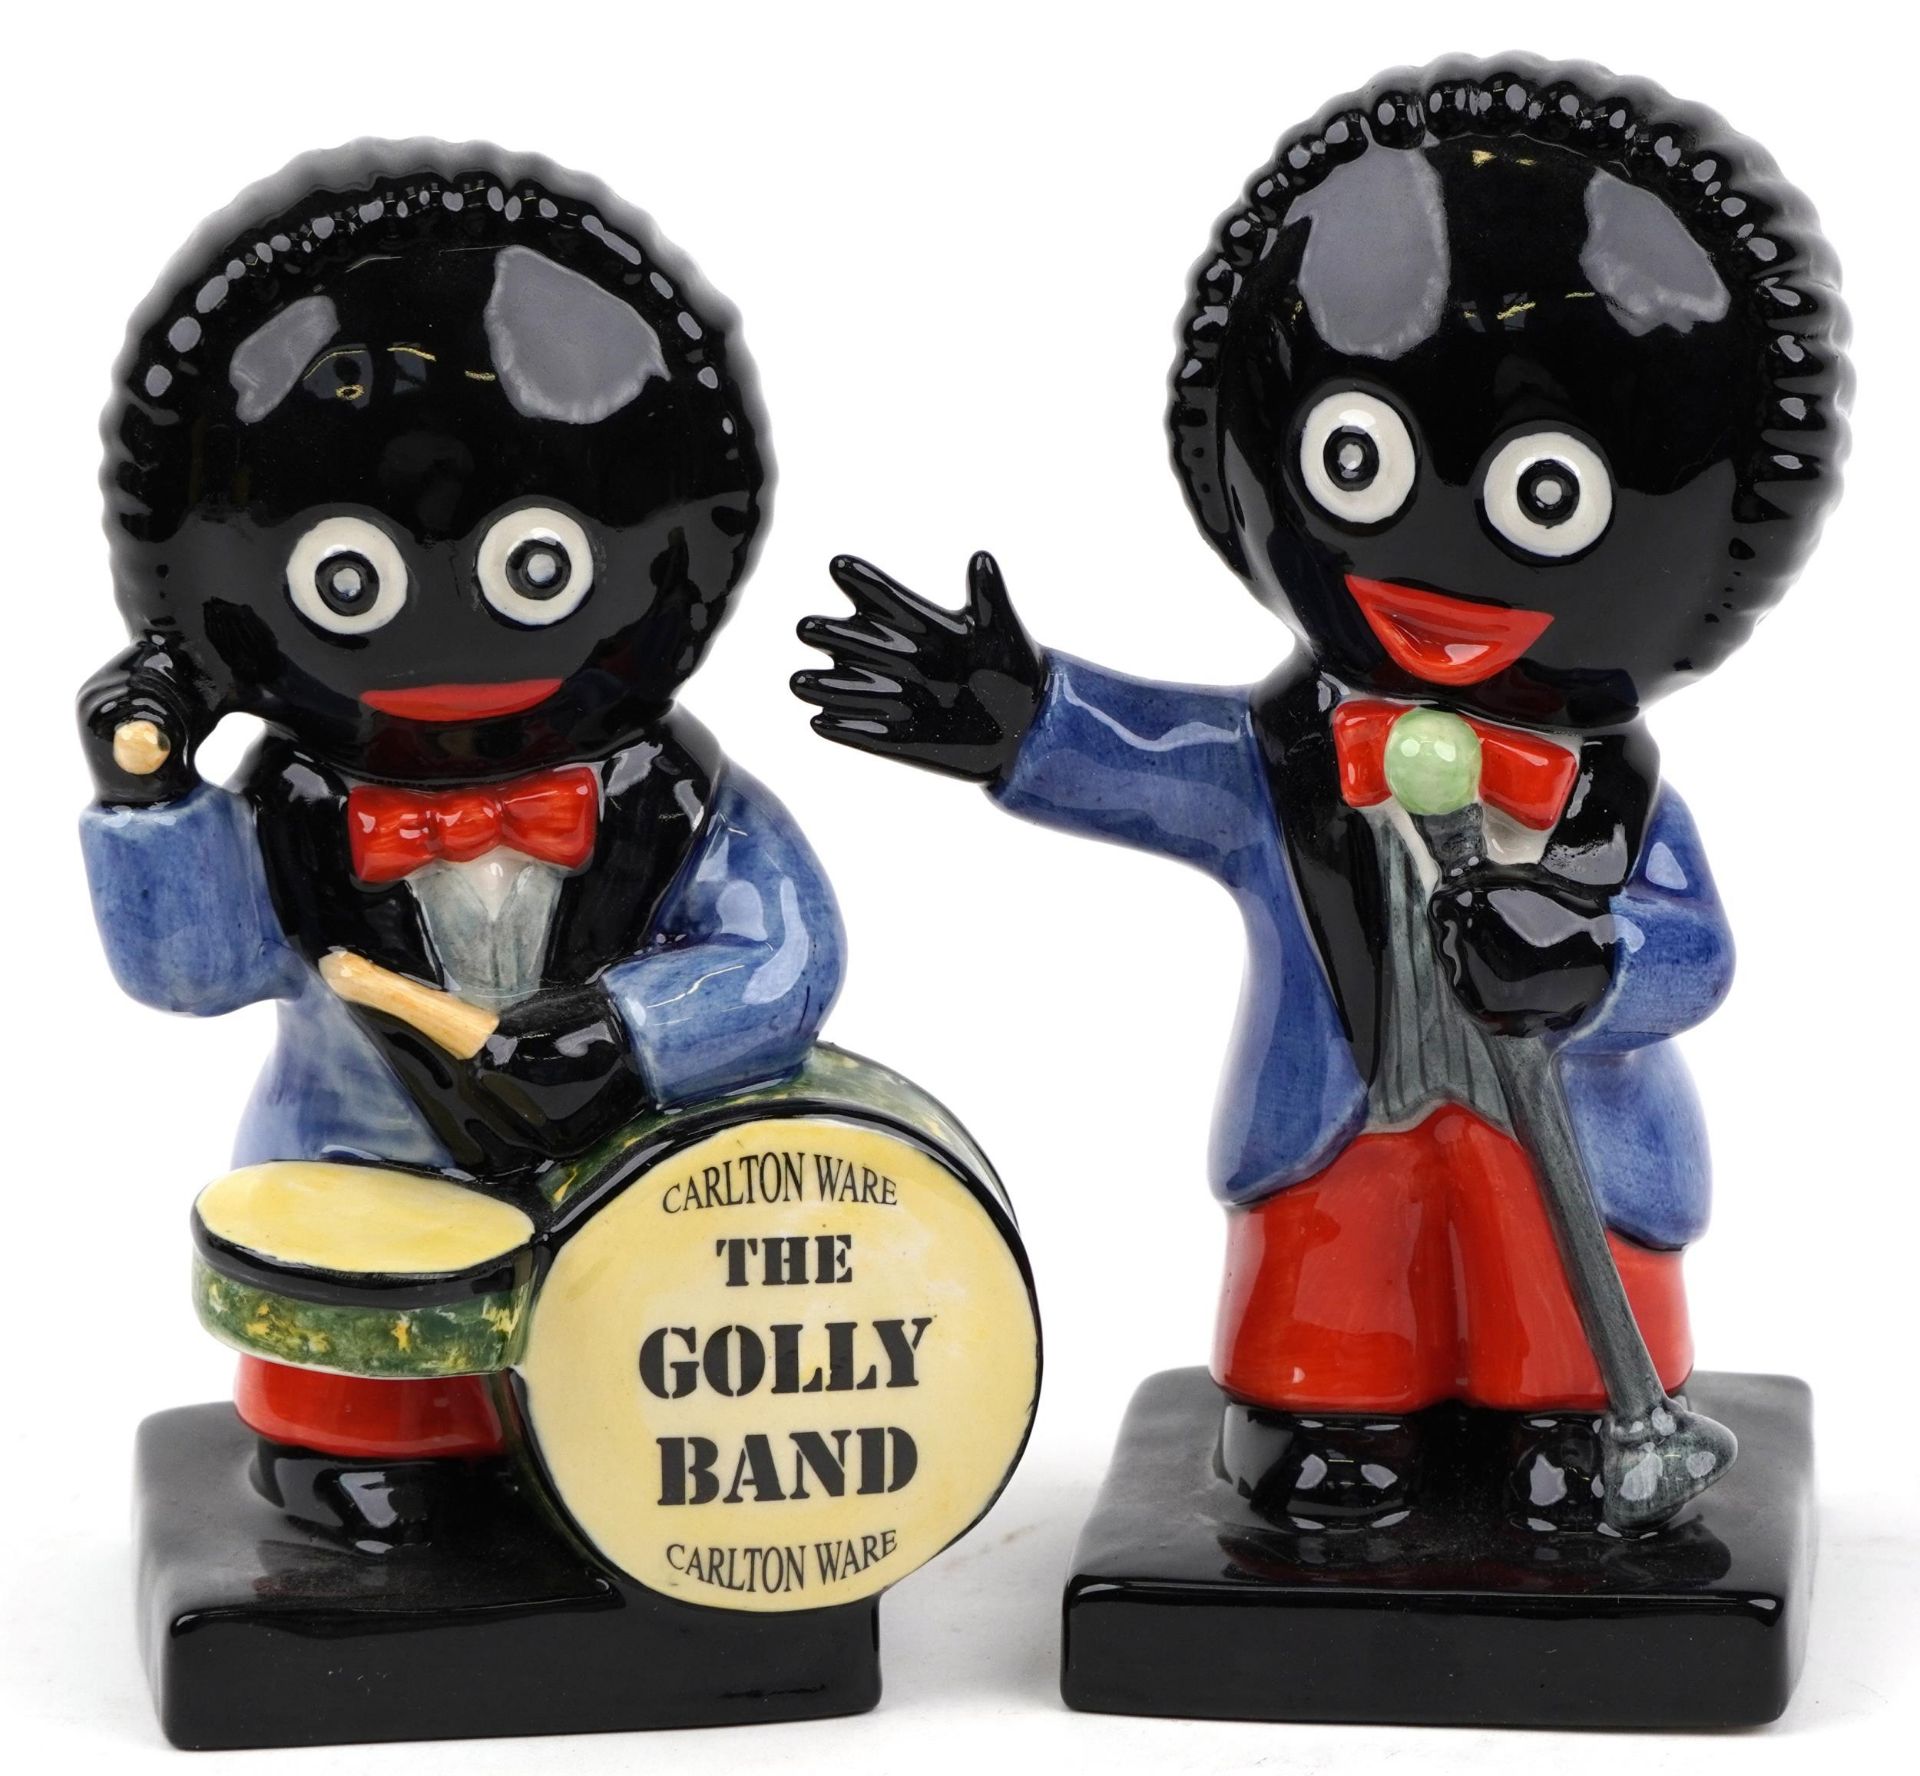 Two Carltonware Golly Band Musicians including Drummer and Singer limited edition 196/750, the